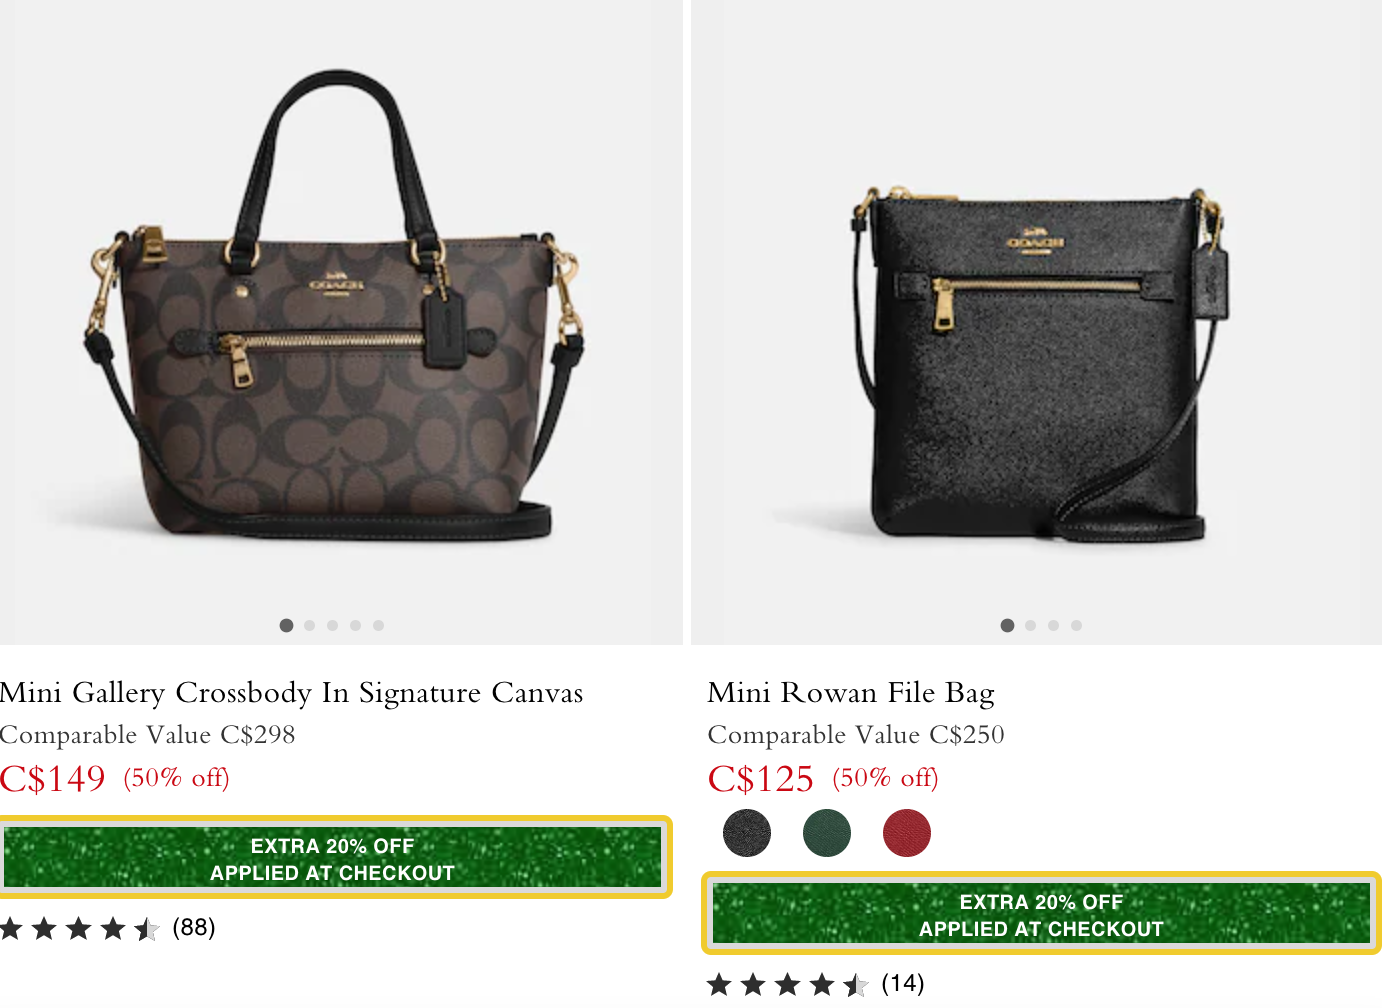 Coach's end of year sale is over, but these clearance deals are still going  strong